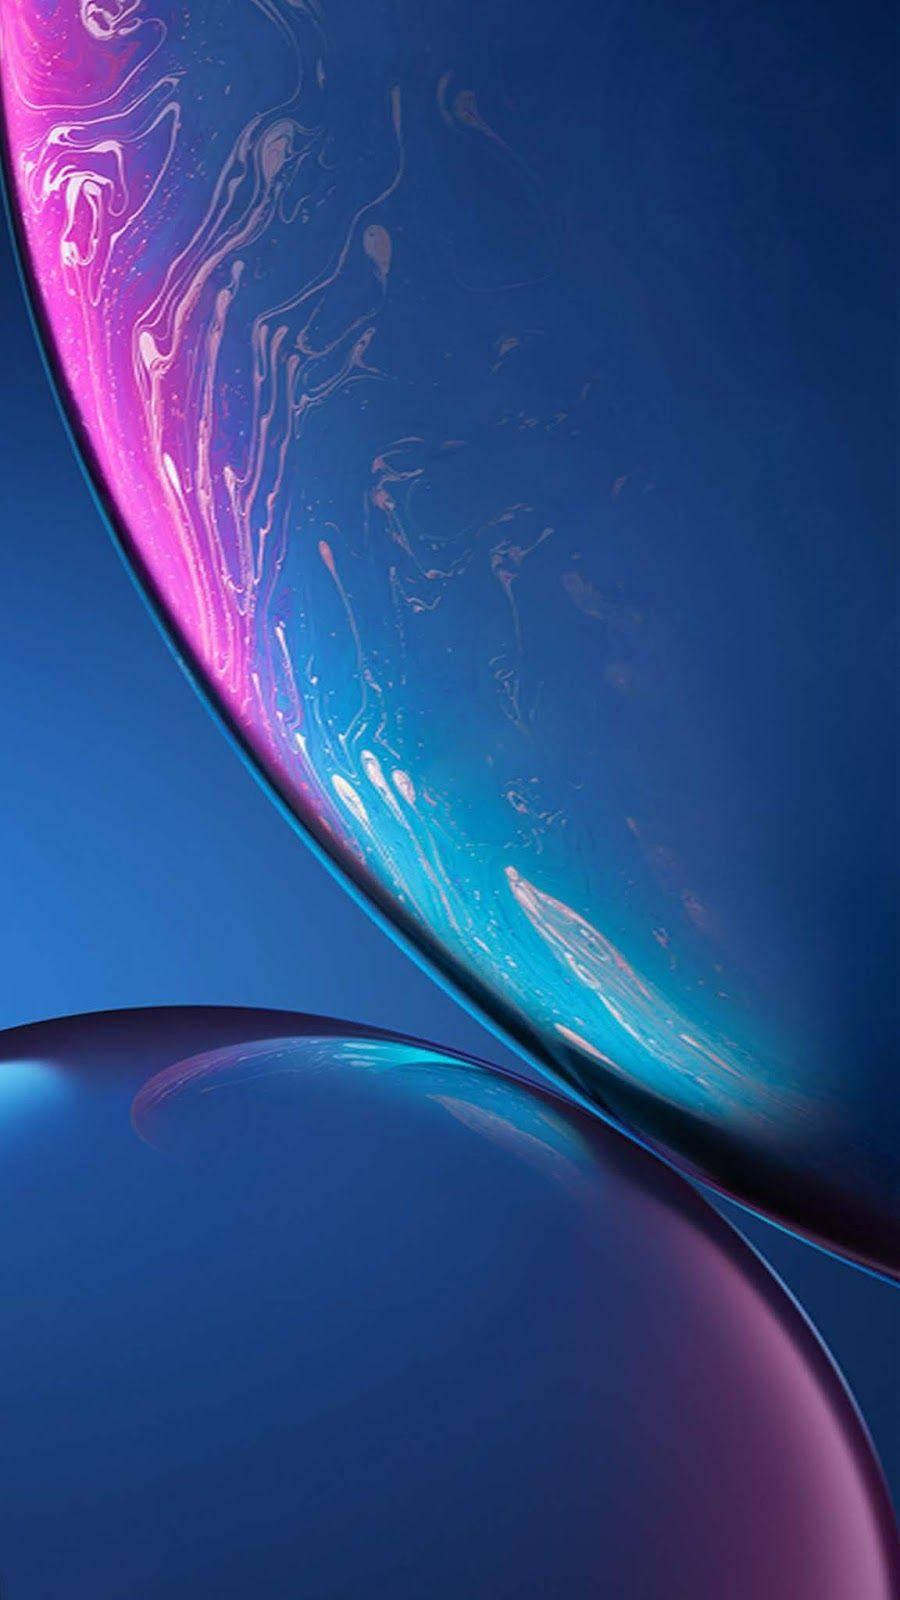 [200+] Blue Iphone Wallpapers | Wallpapers.com